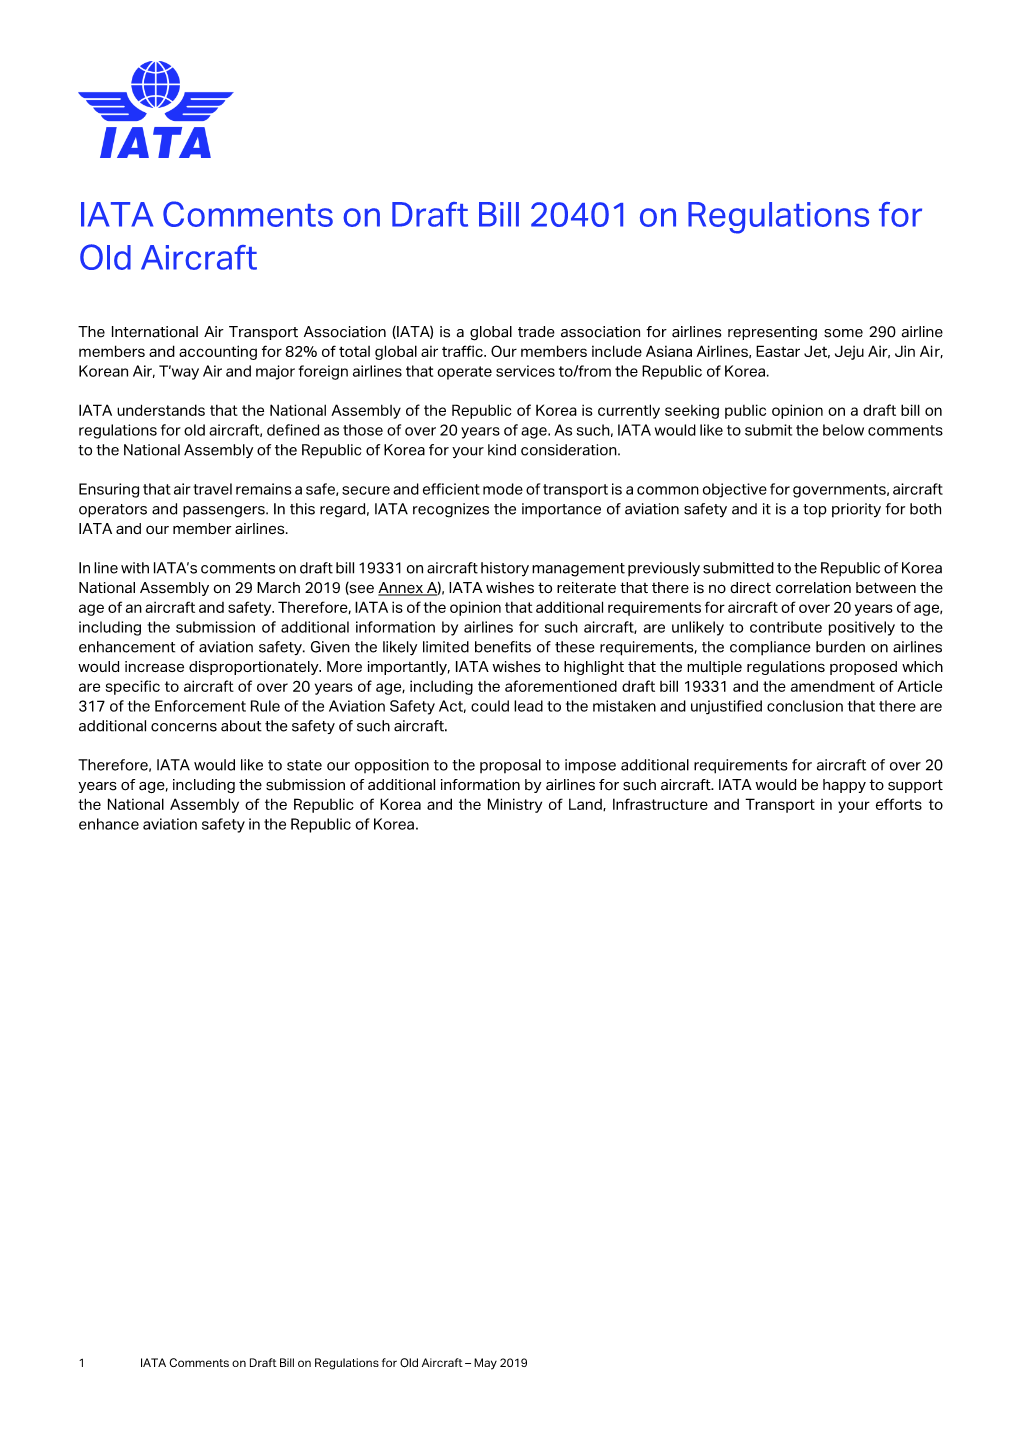 IATA Comments on Draft Bill 20401 on Regulations for Old Aircraft